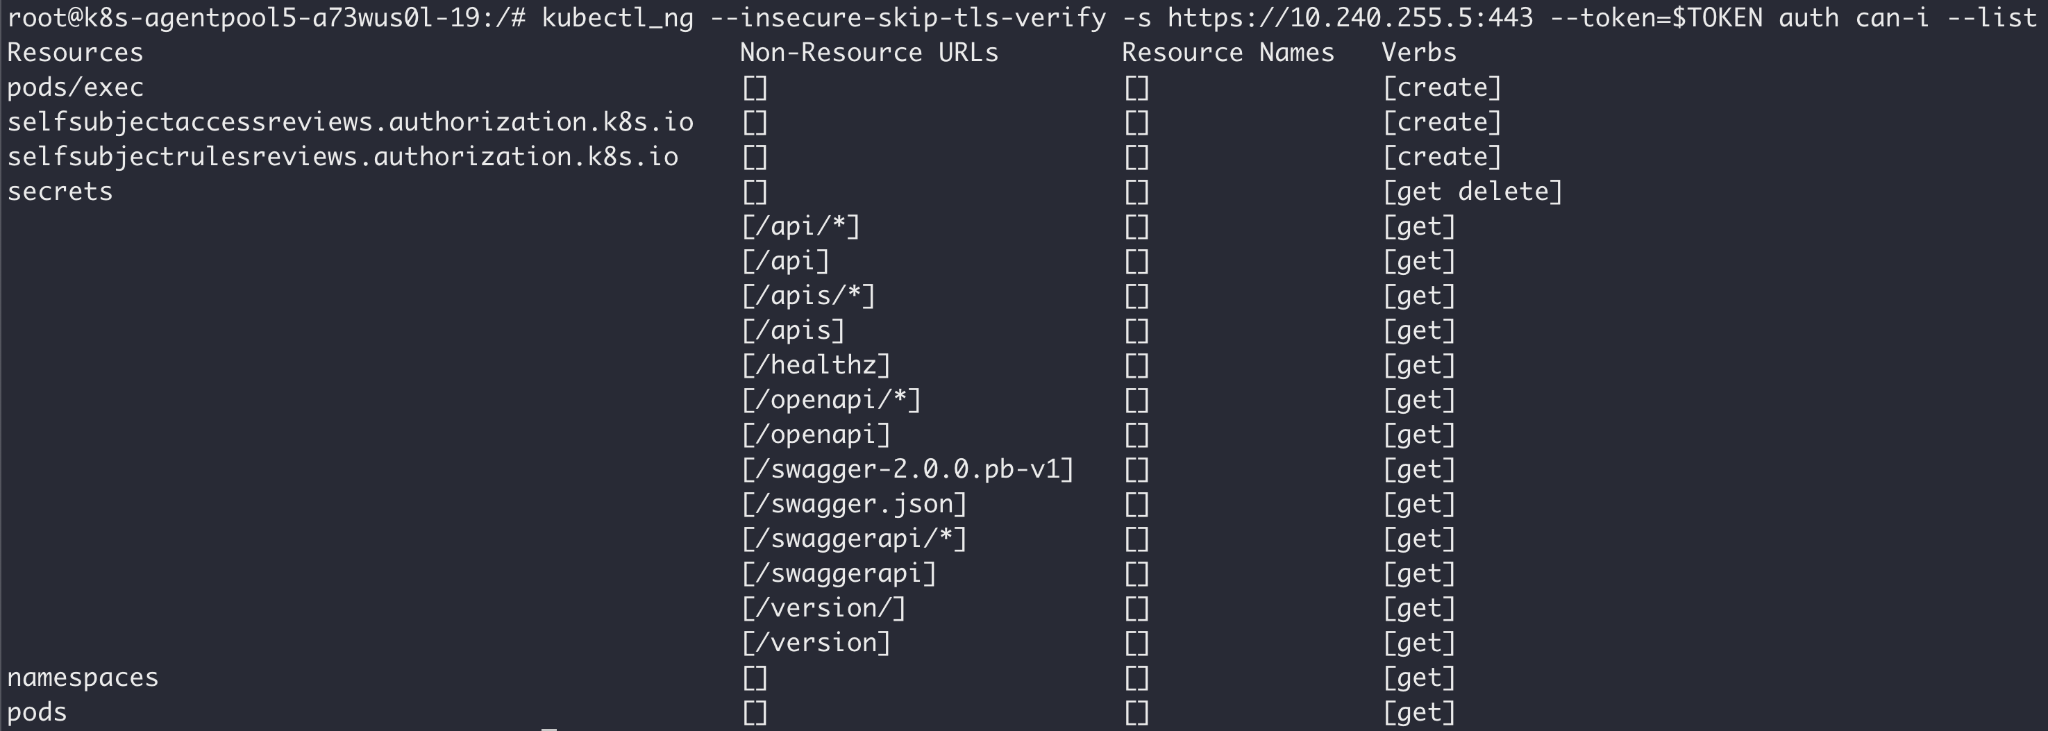 This shows the privileges of the 'bridge' token in the default namespace. 